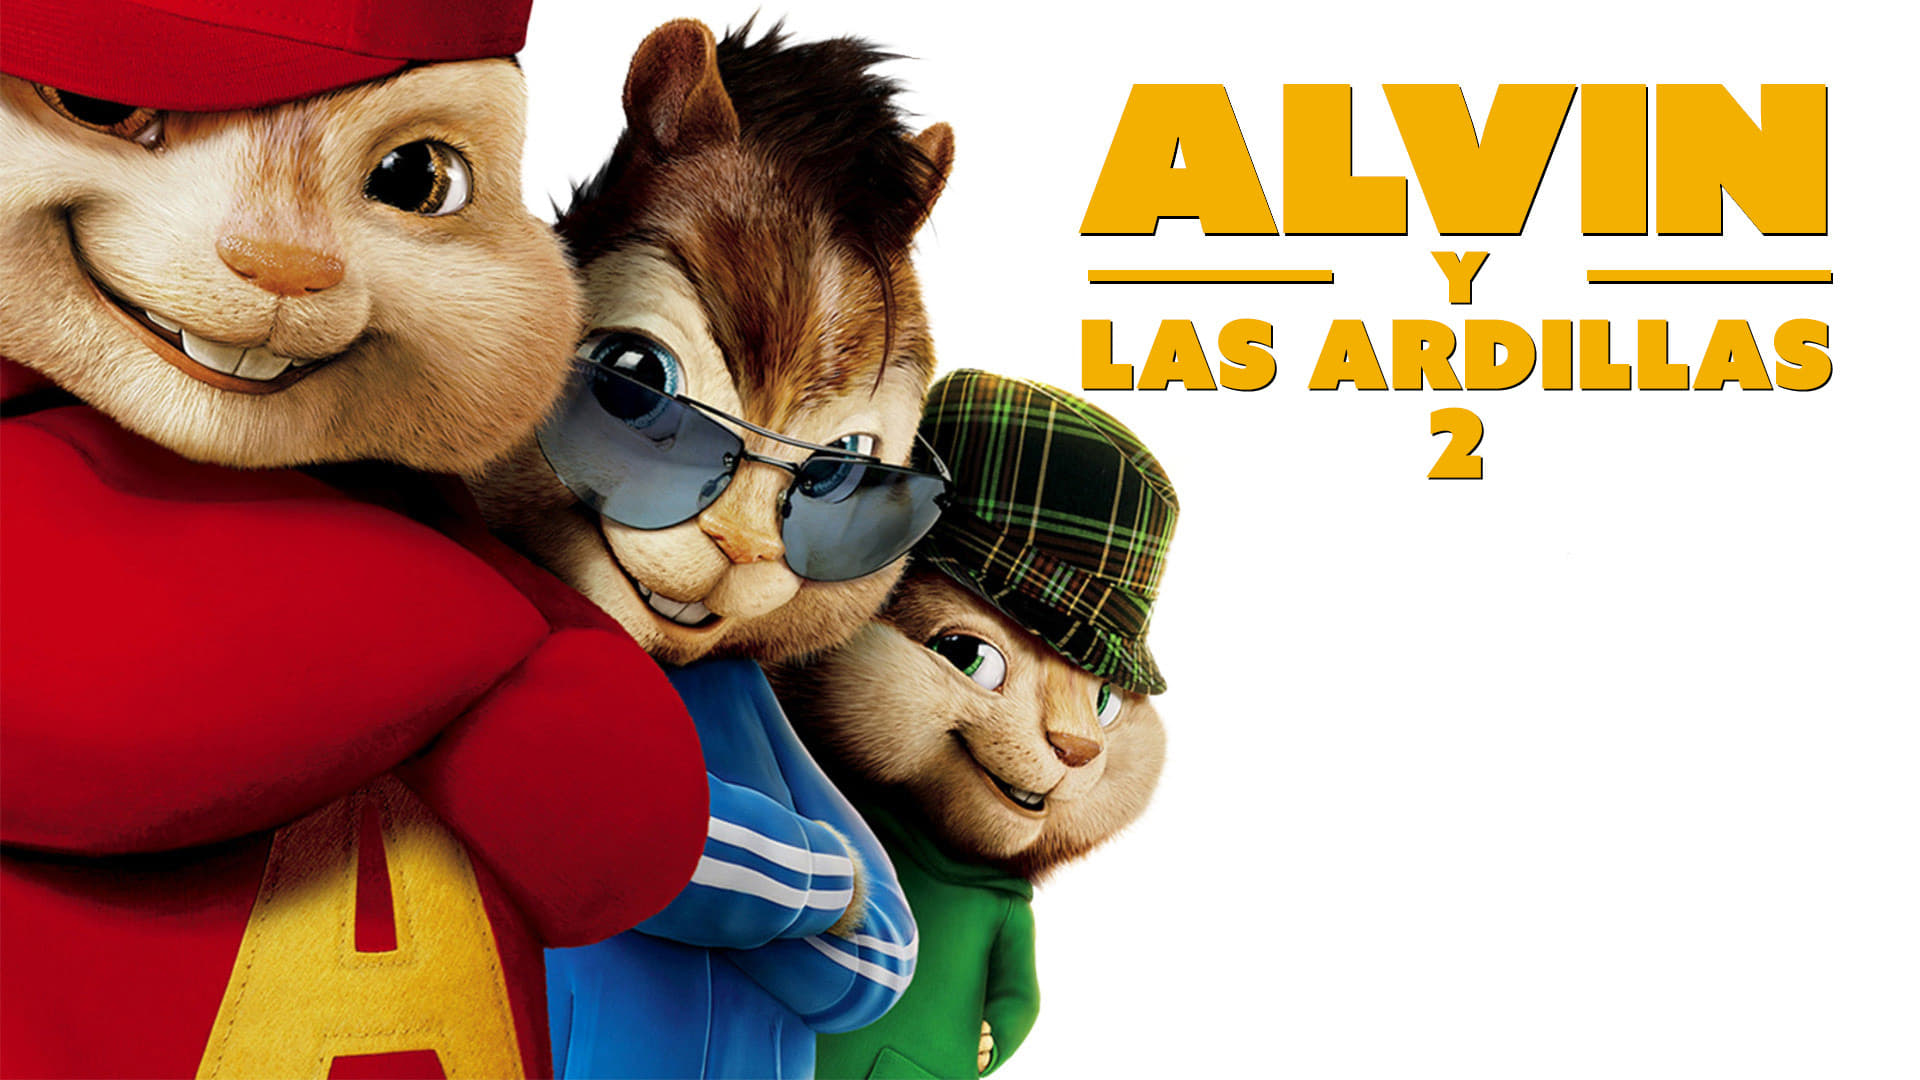 Alvin and the chipmunks lost in space camp